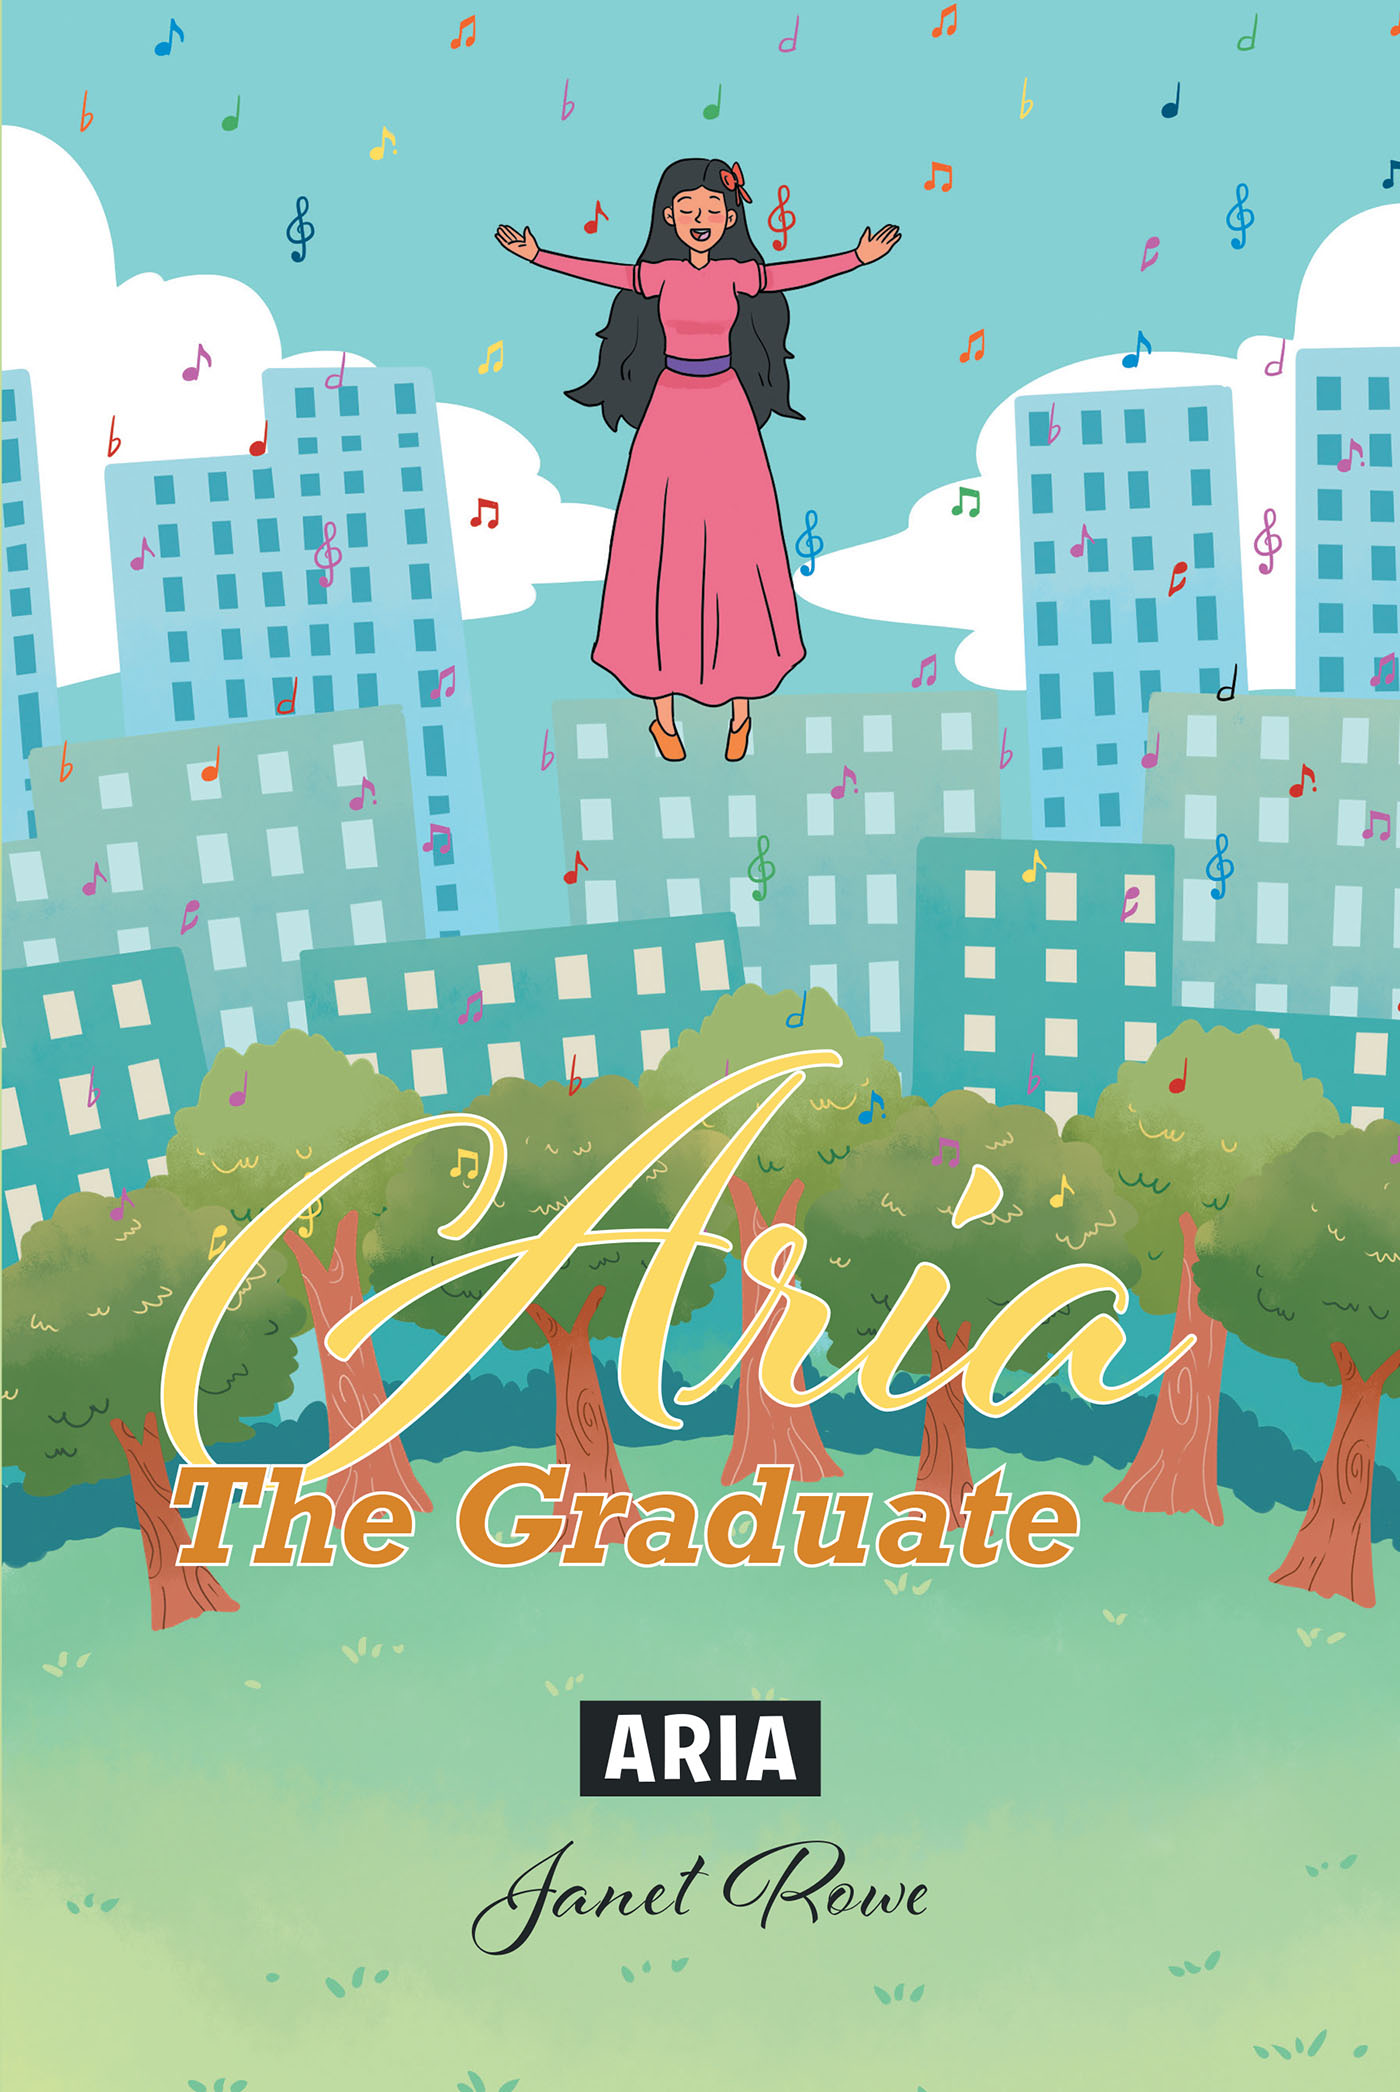 Author Janet Rowe’s New Book, "Aria: The Graduate," Follows the Fascinating Adventures of an Angel of Hope Sent to Earth on a Special Mission from God to Help Mankind